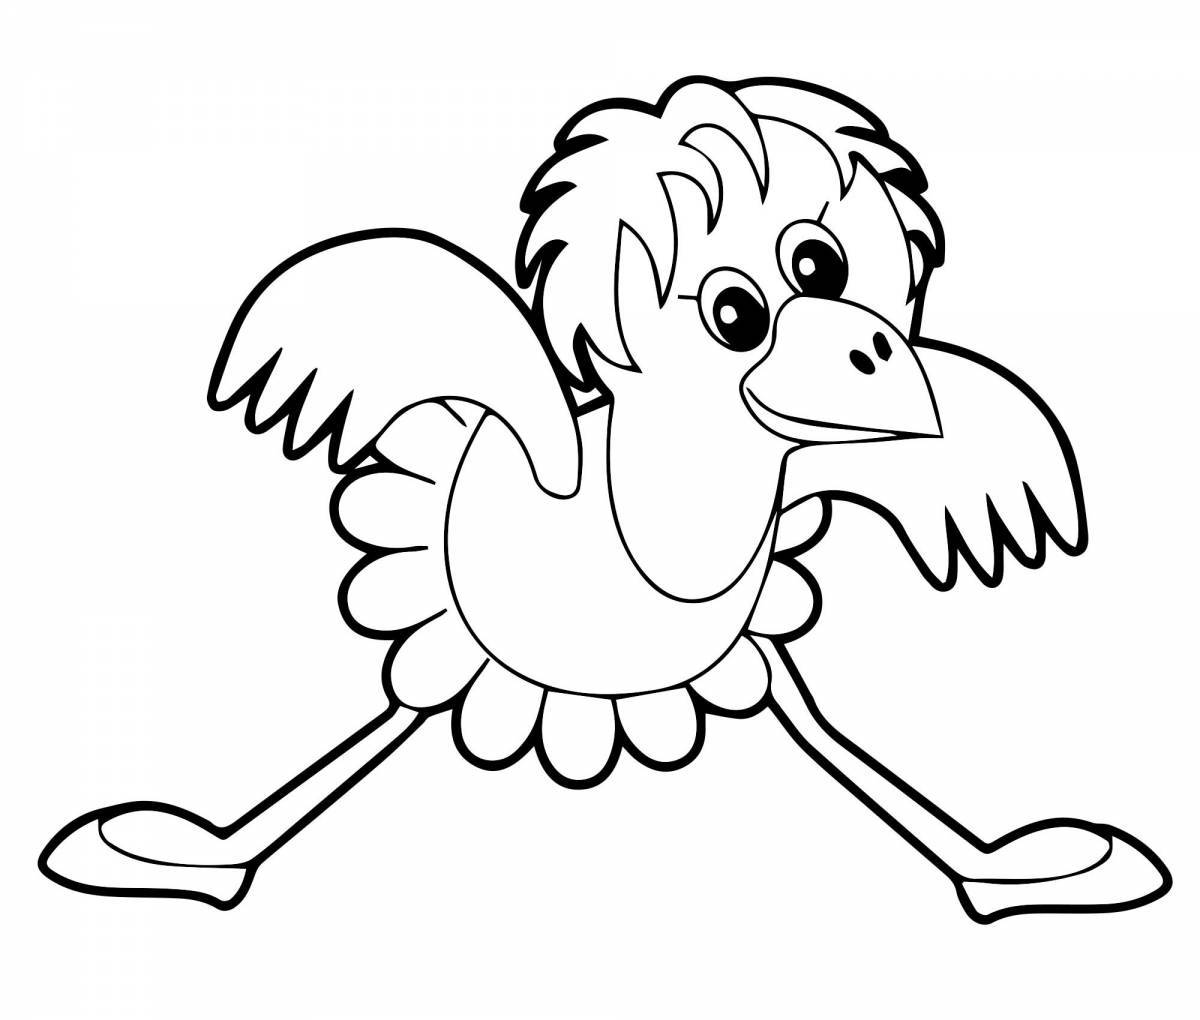 Amazing crow coloring page for kids